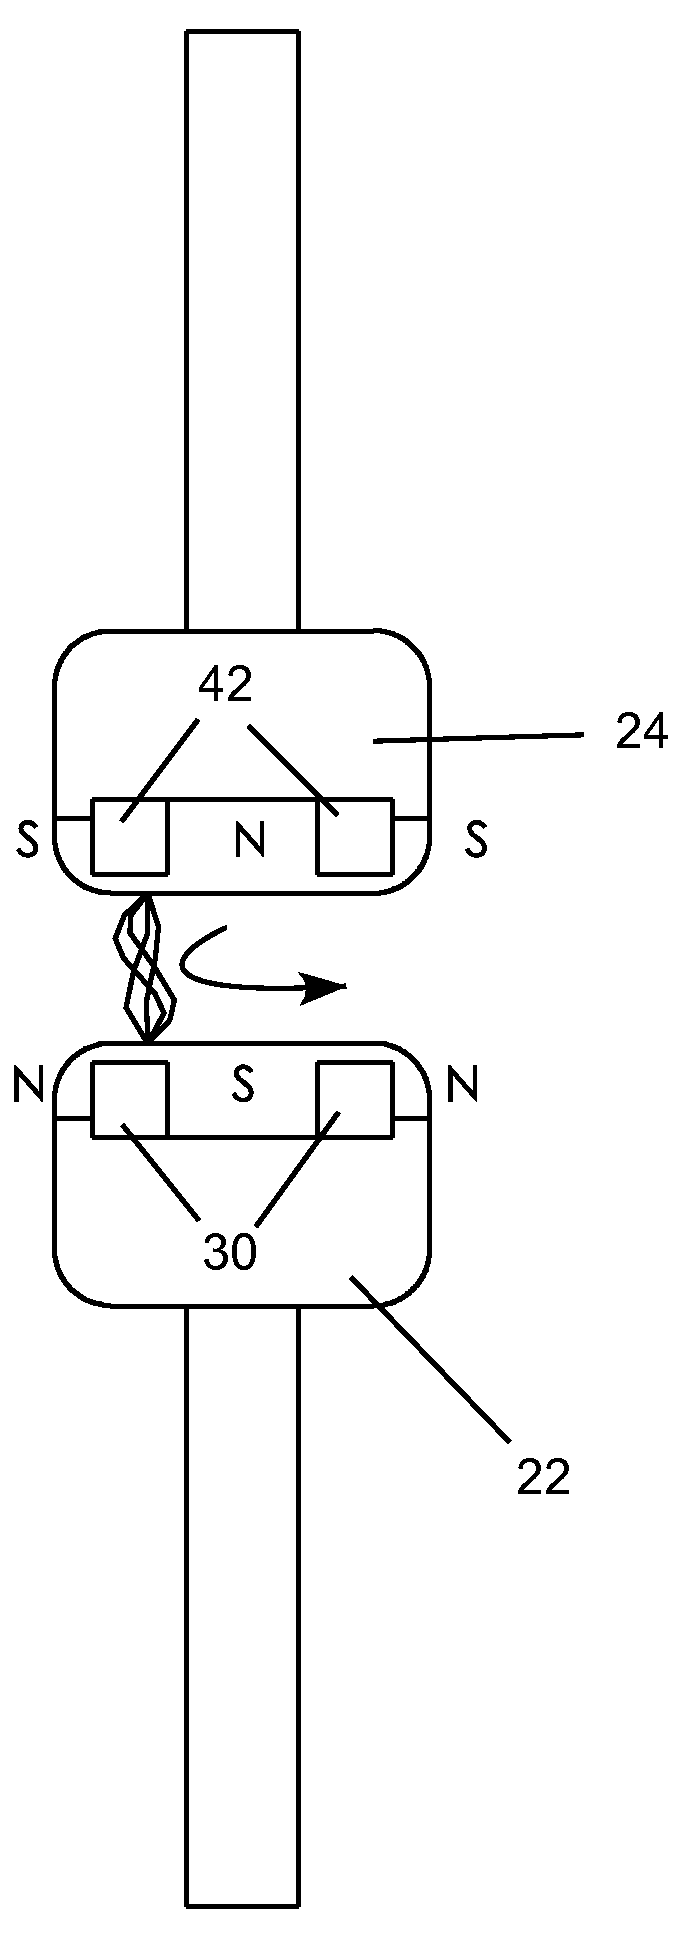 Magnet interrupter for high voltage switching